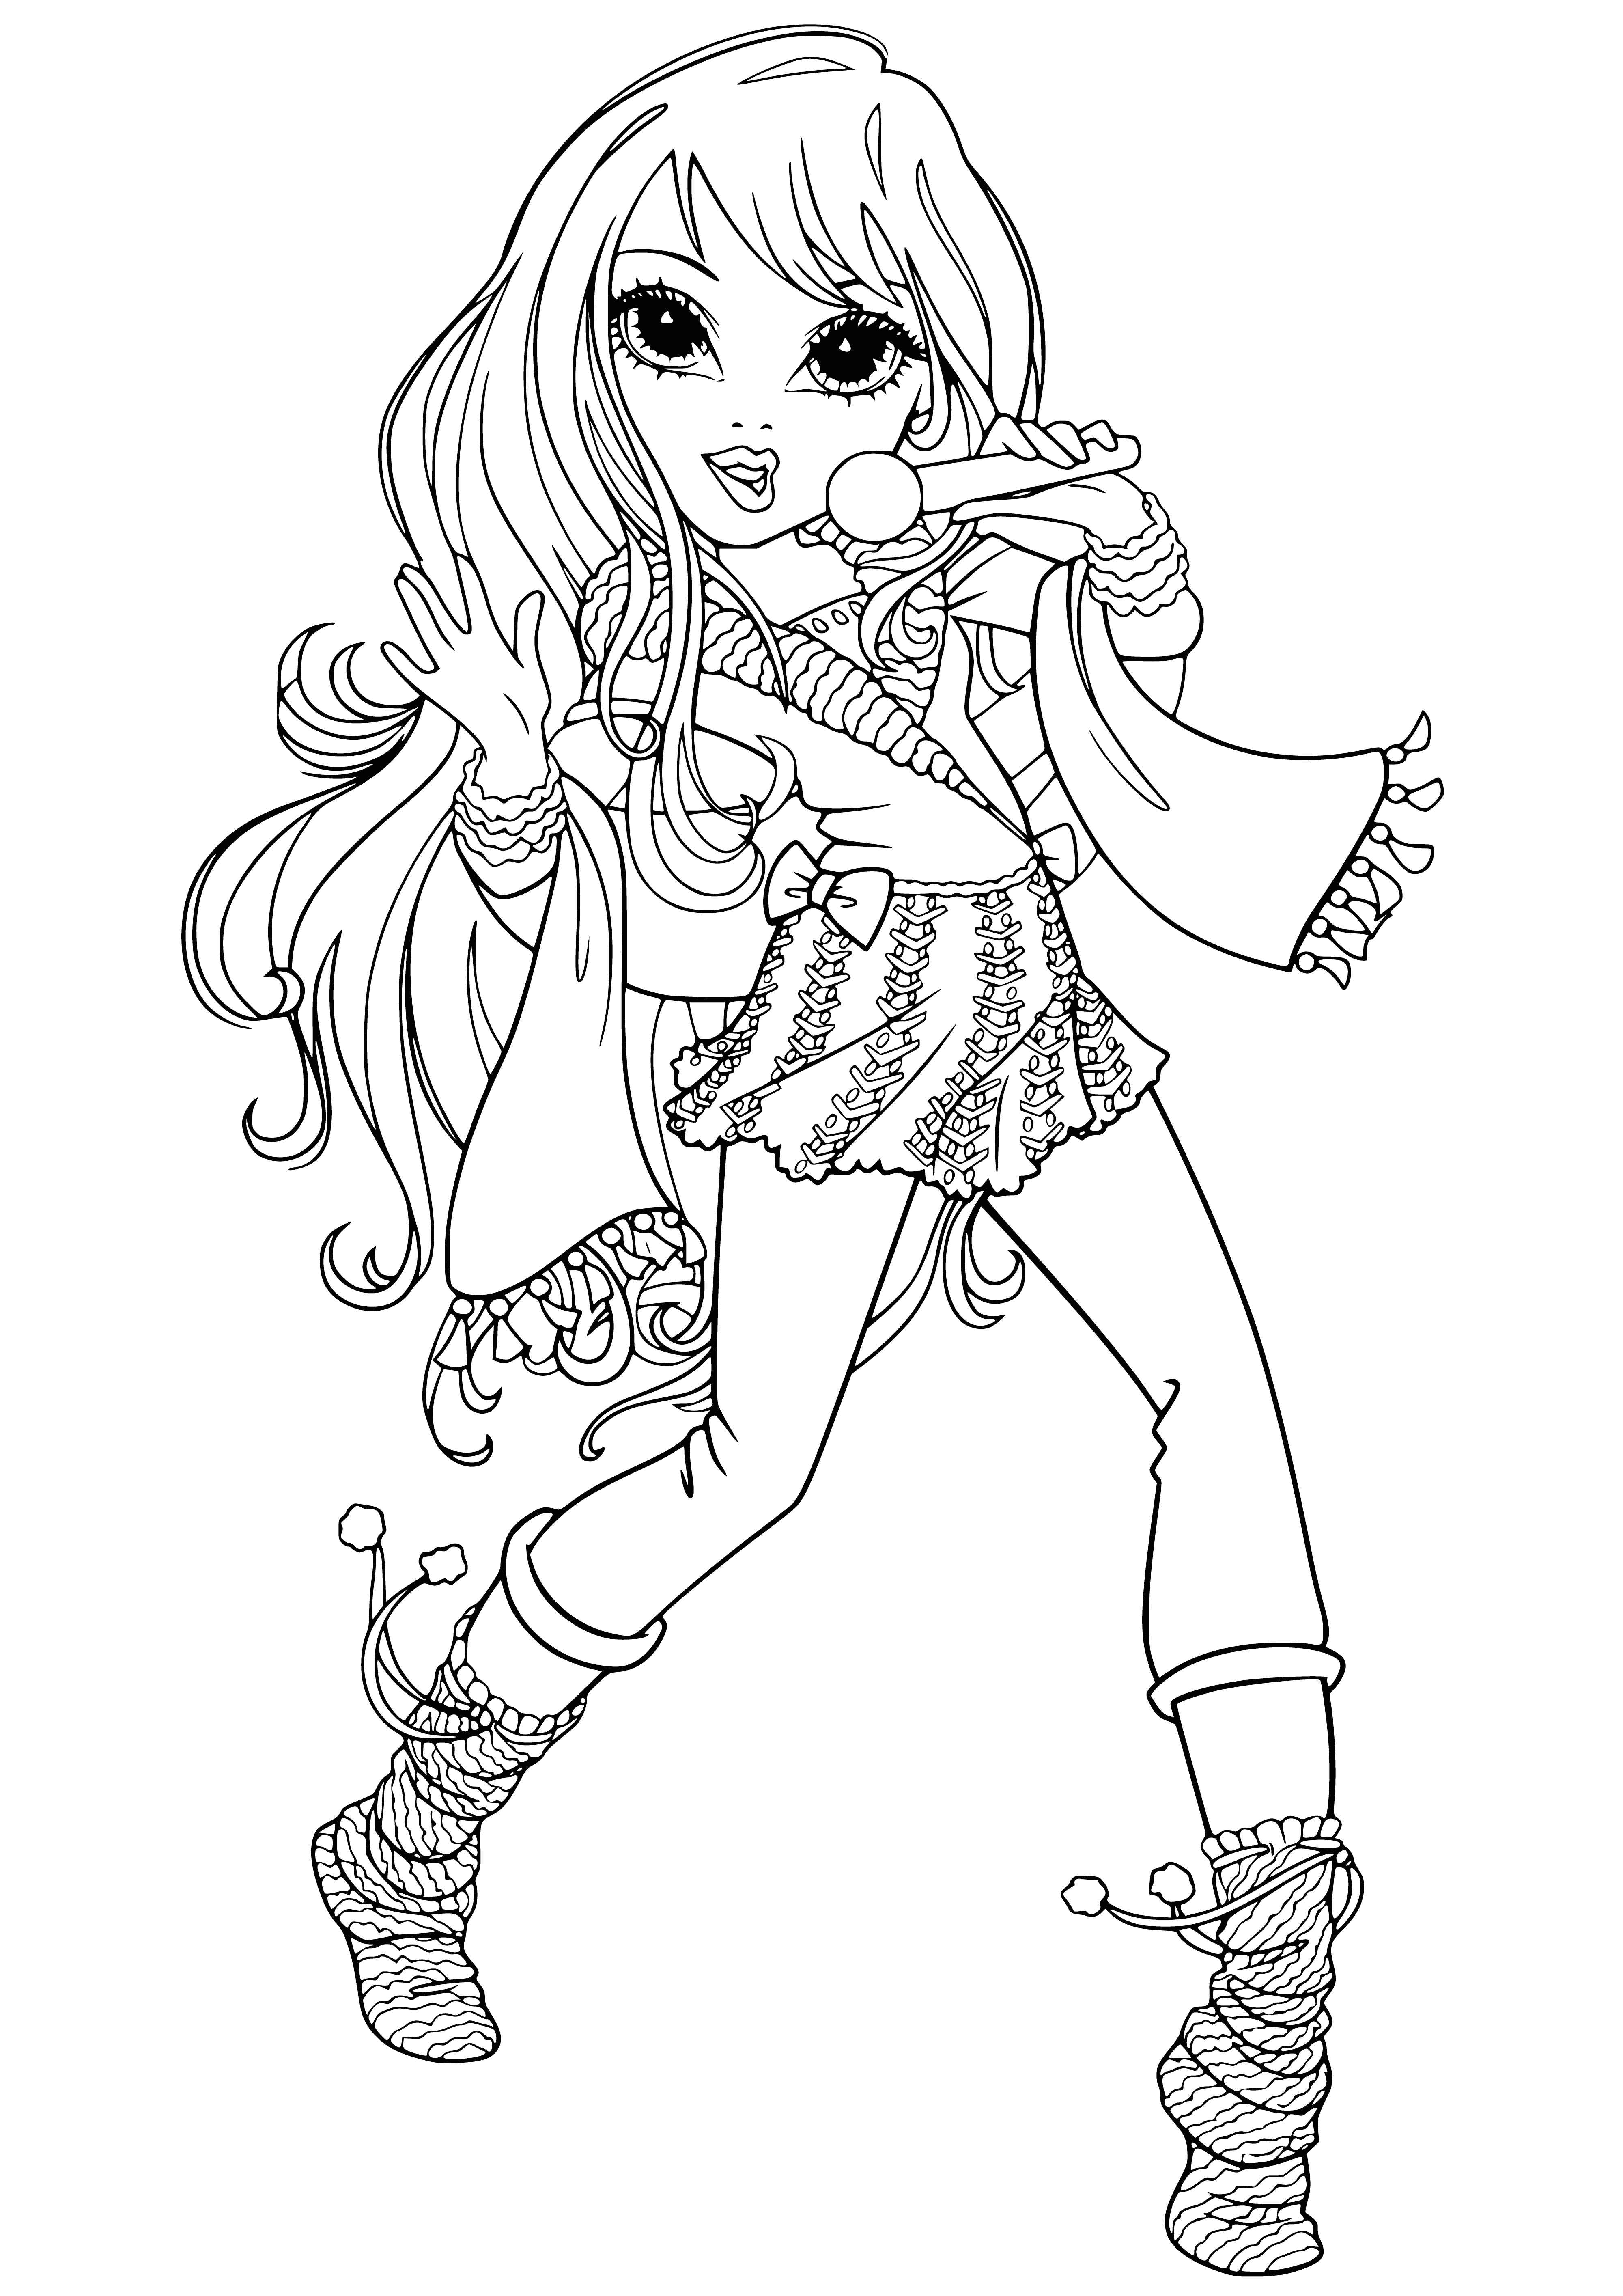 coloring page: Lexa is a Moxie Girl with long curly hair, big brown eyes, a sparkly dress, and a big smile.